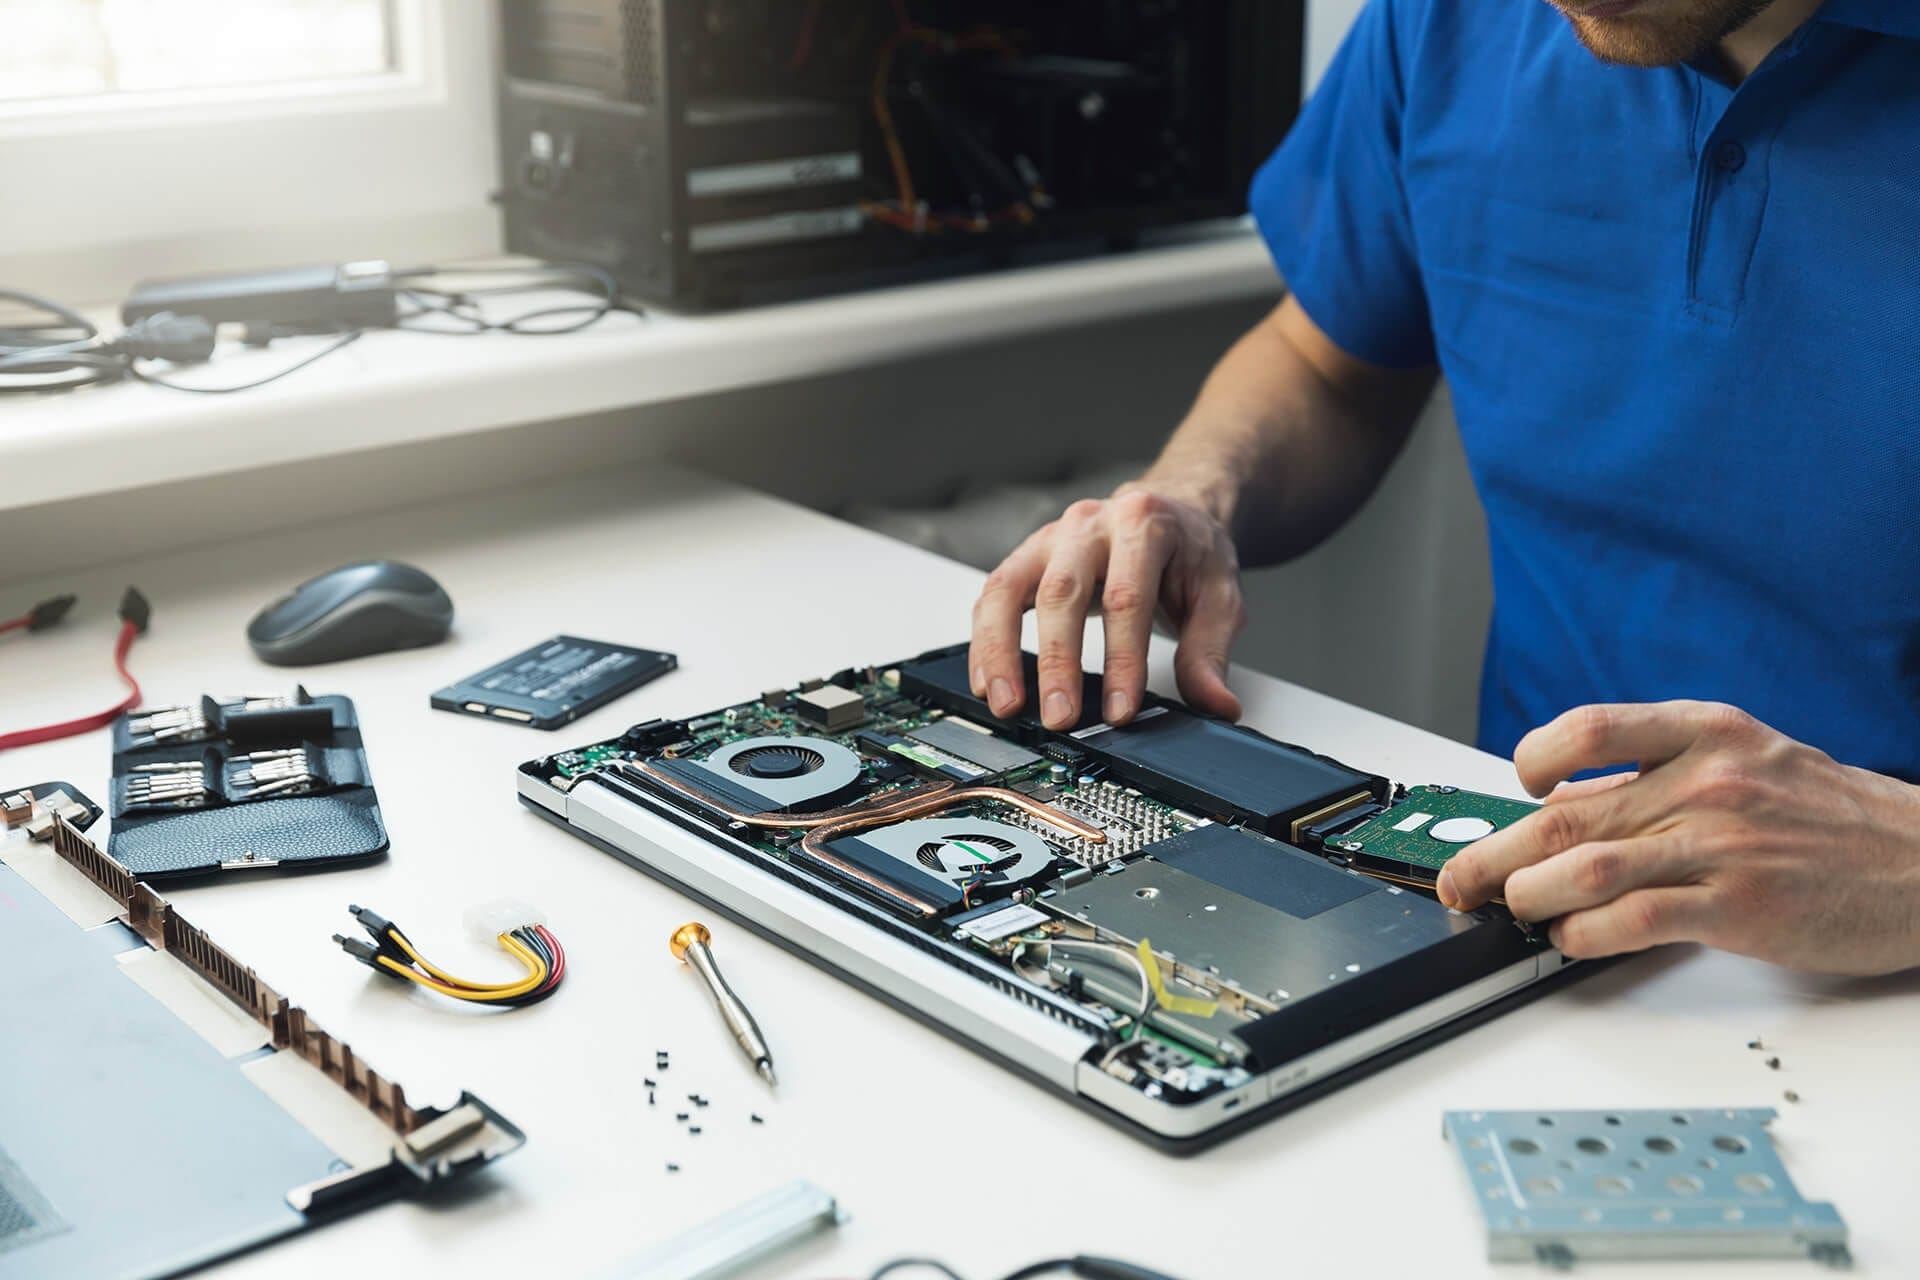 laptop repair brisbane bayside - Know More Approximately The Two Methods For Registry Error Fix